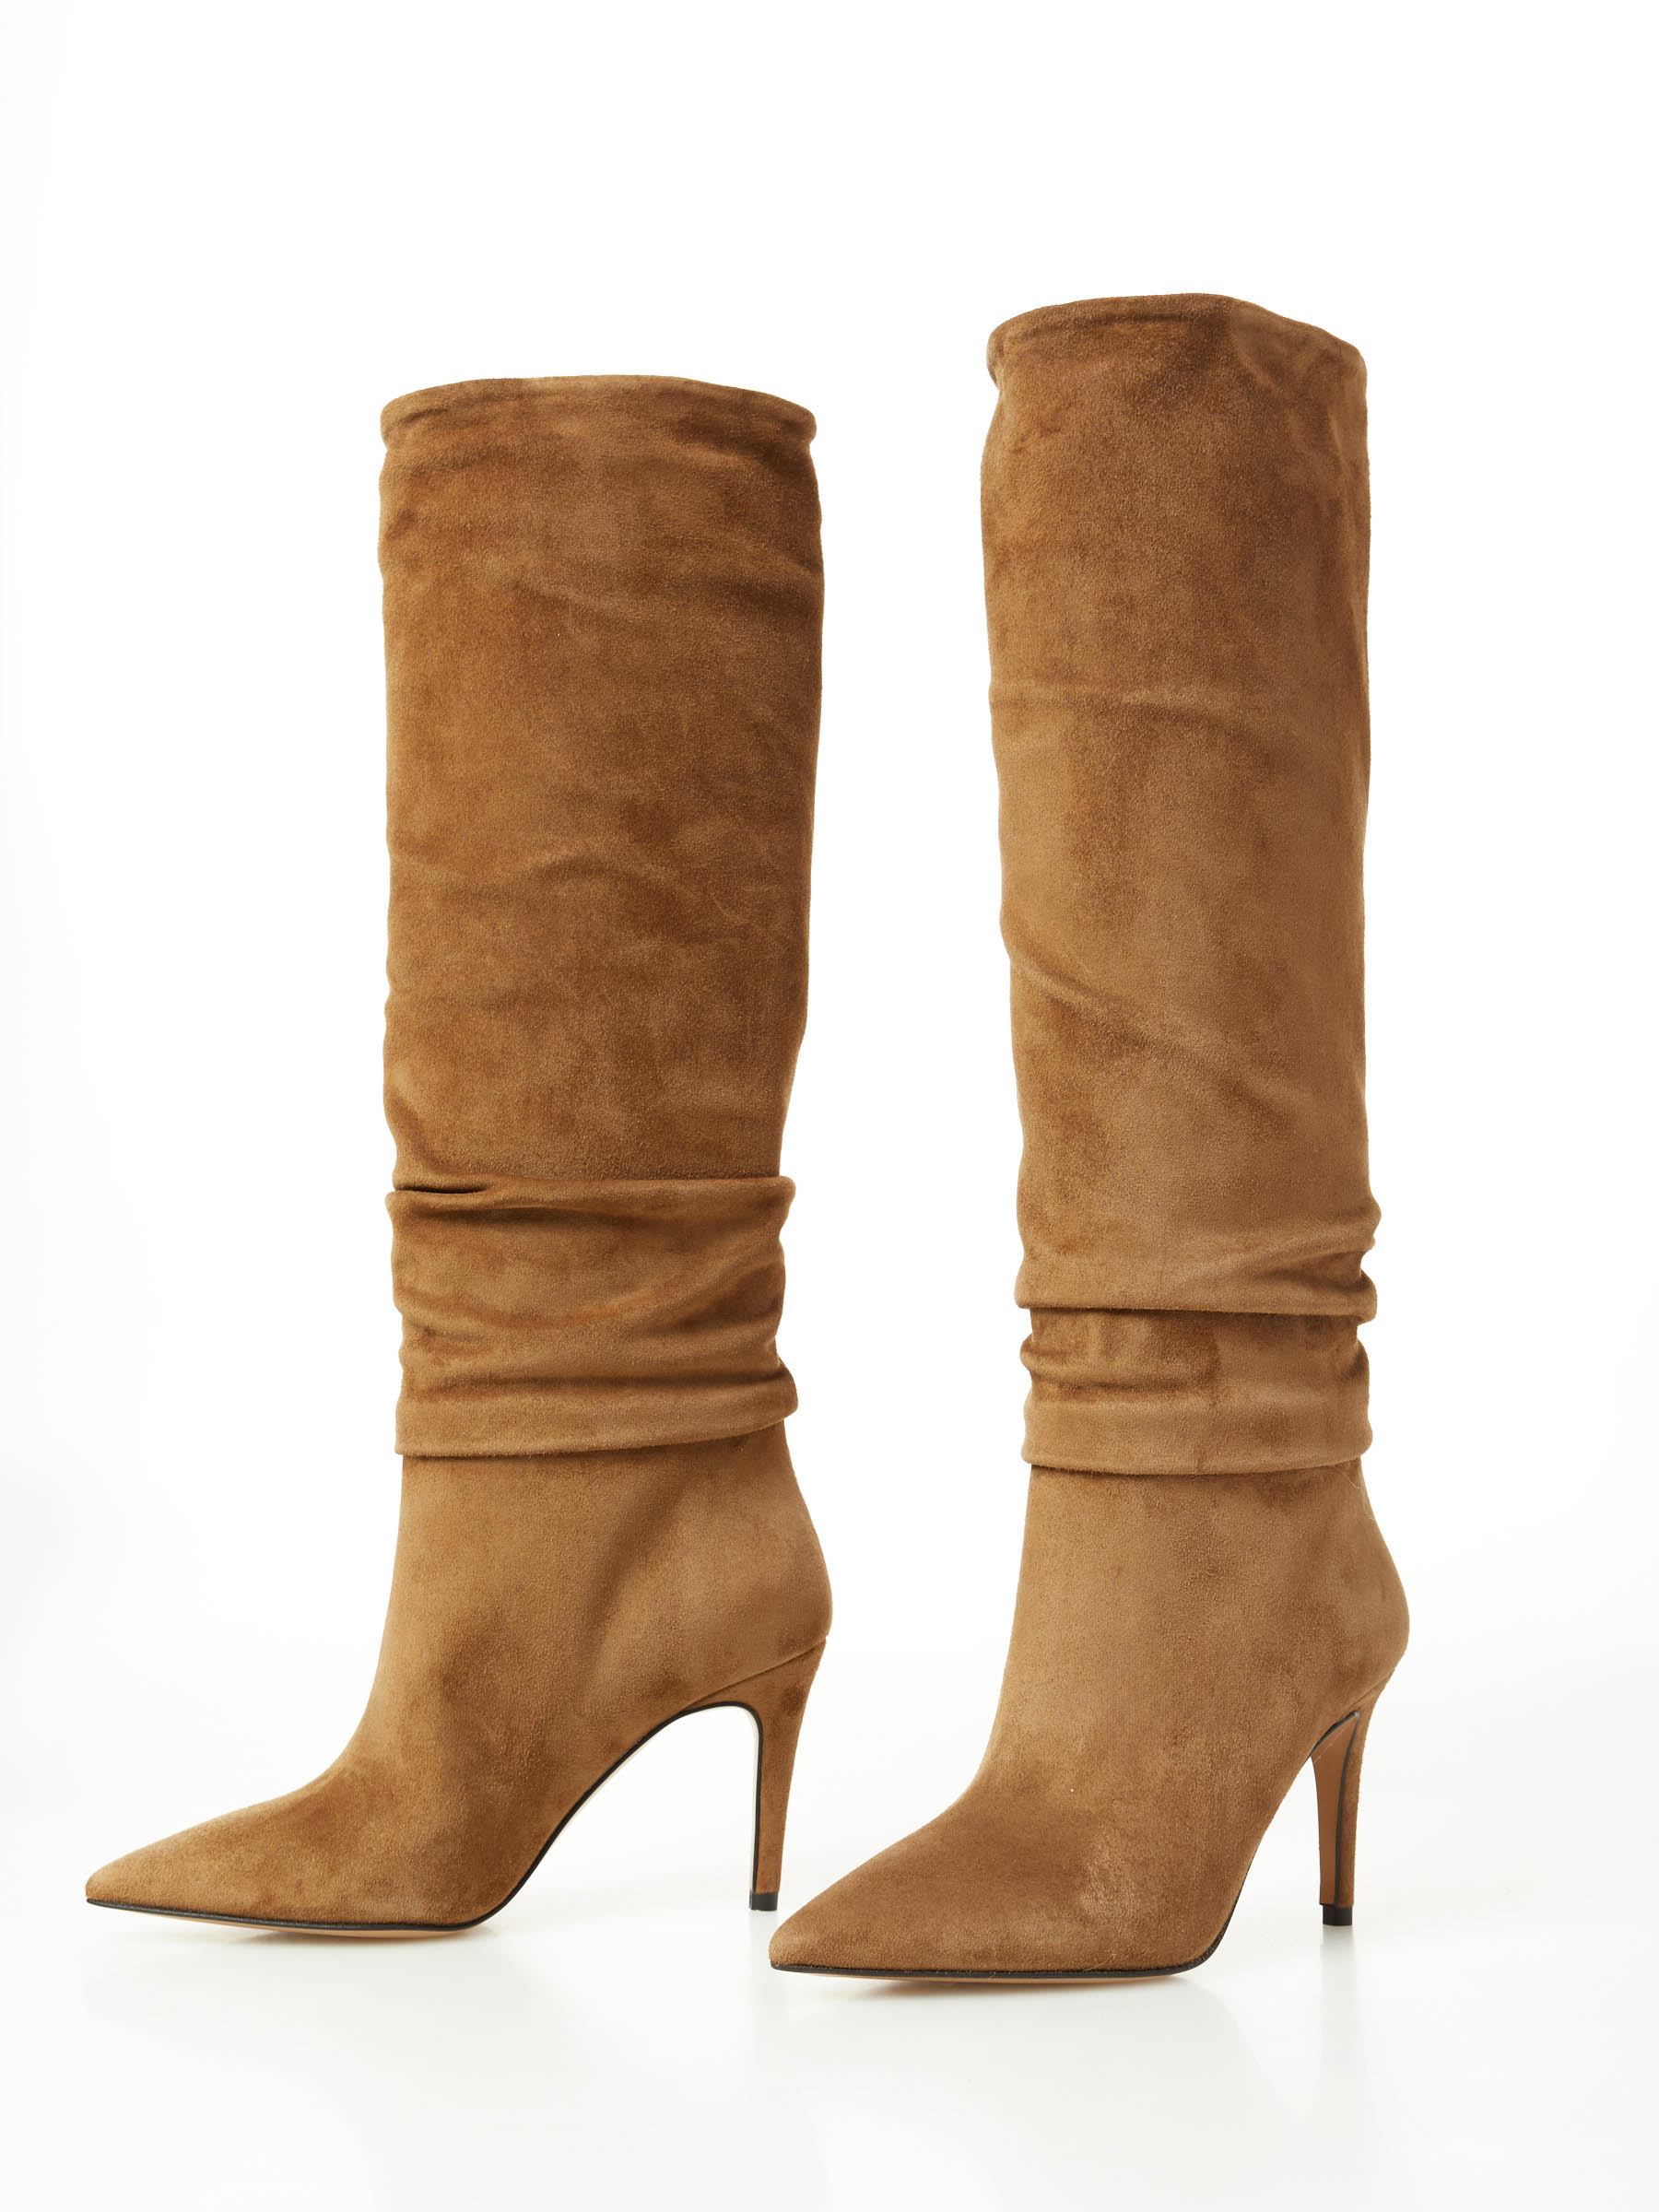 Curled Suede Boot